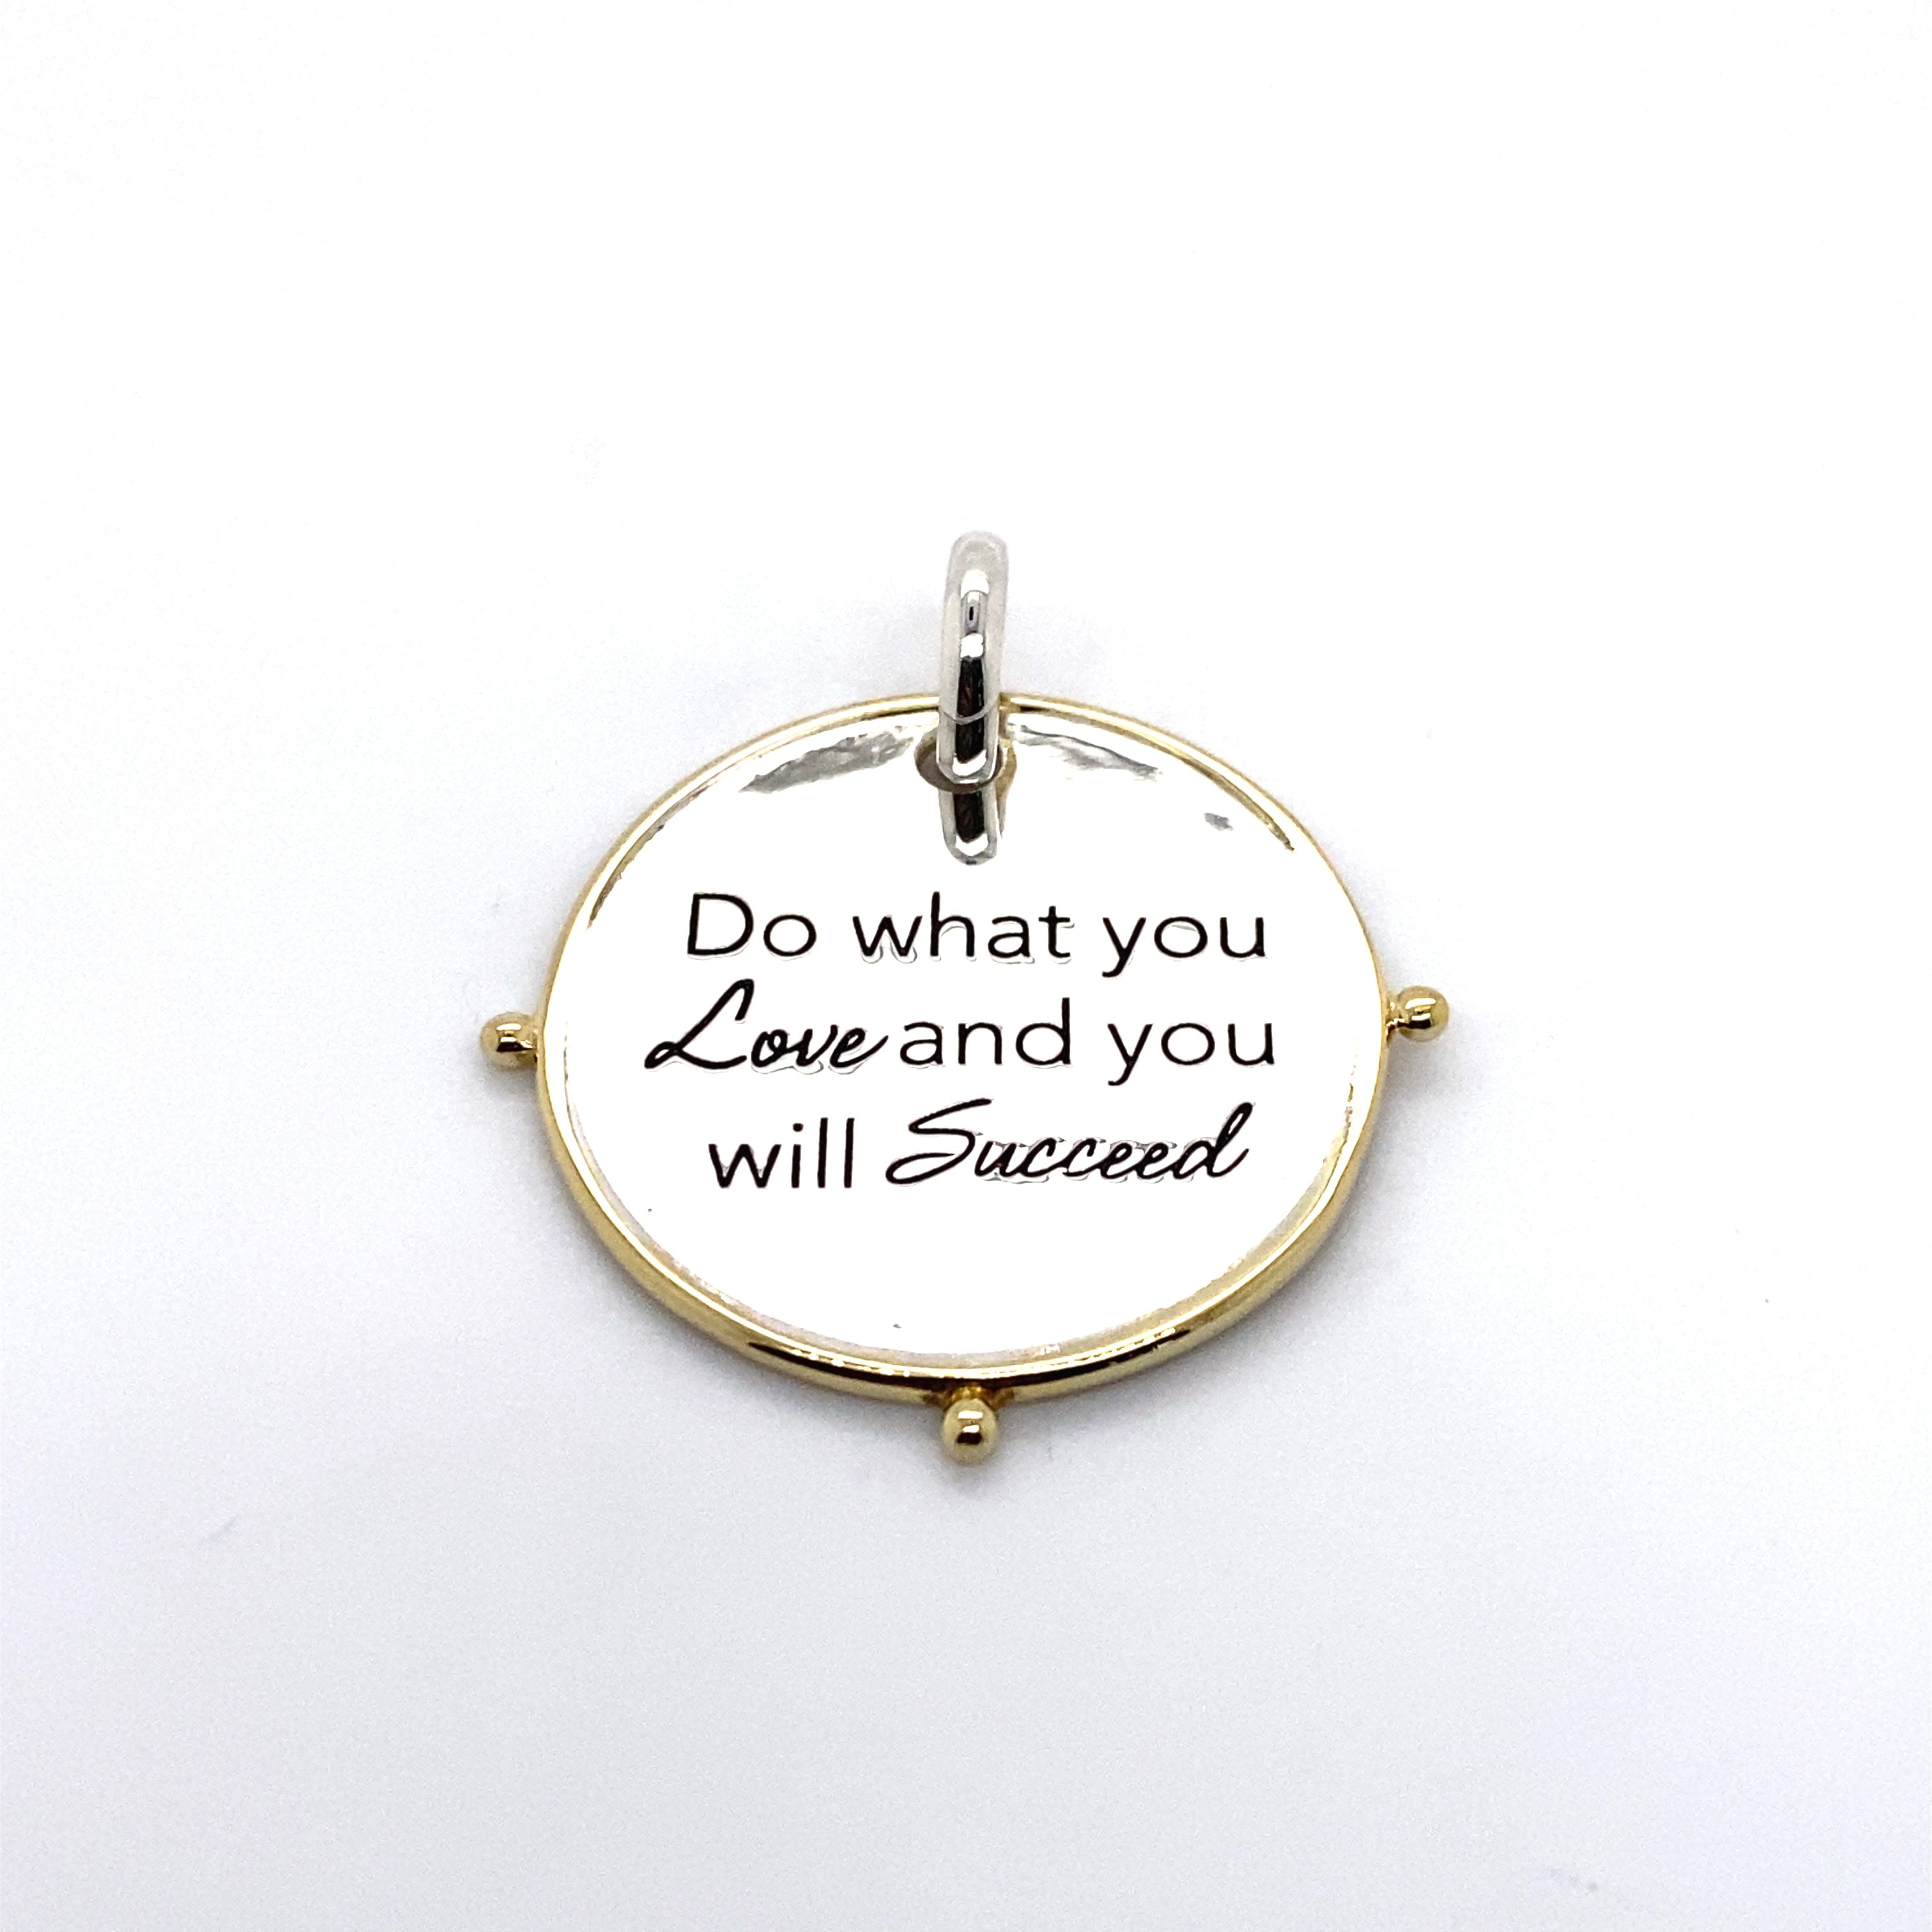 do what you love and you will succeed pendant charm